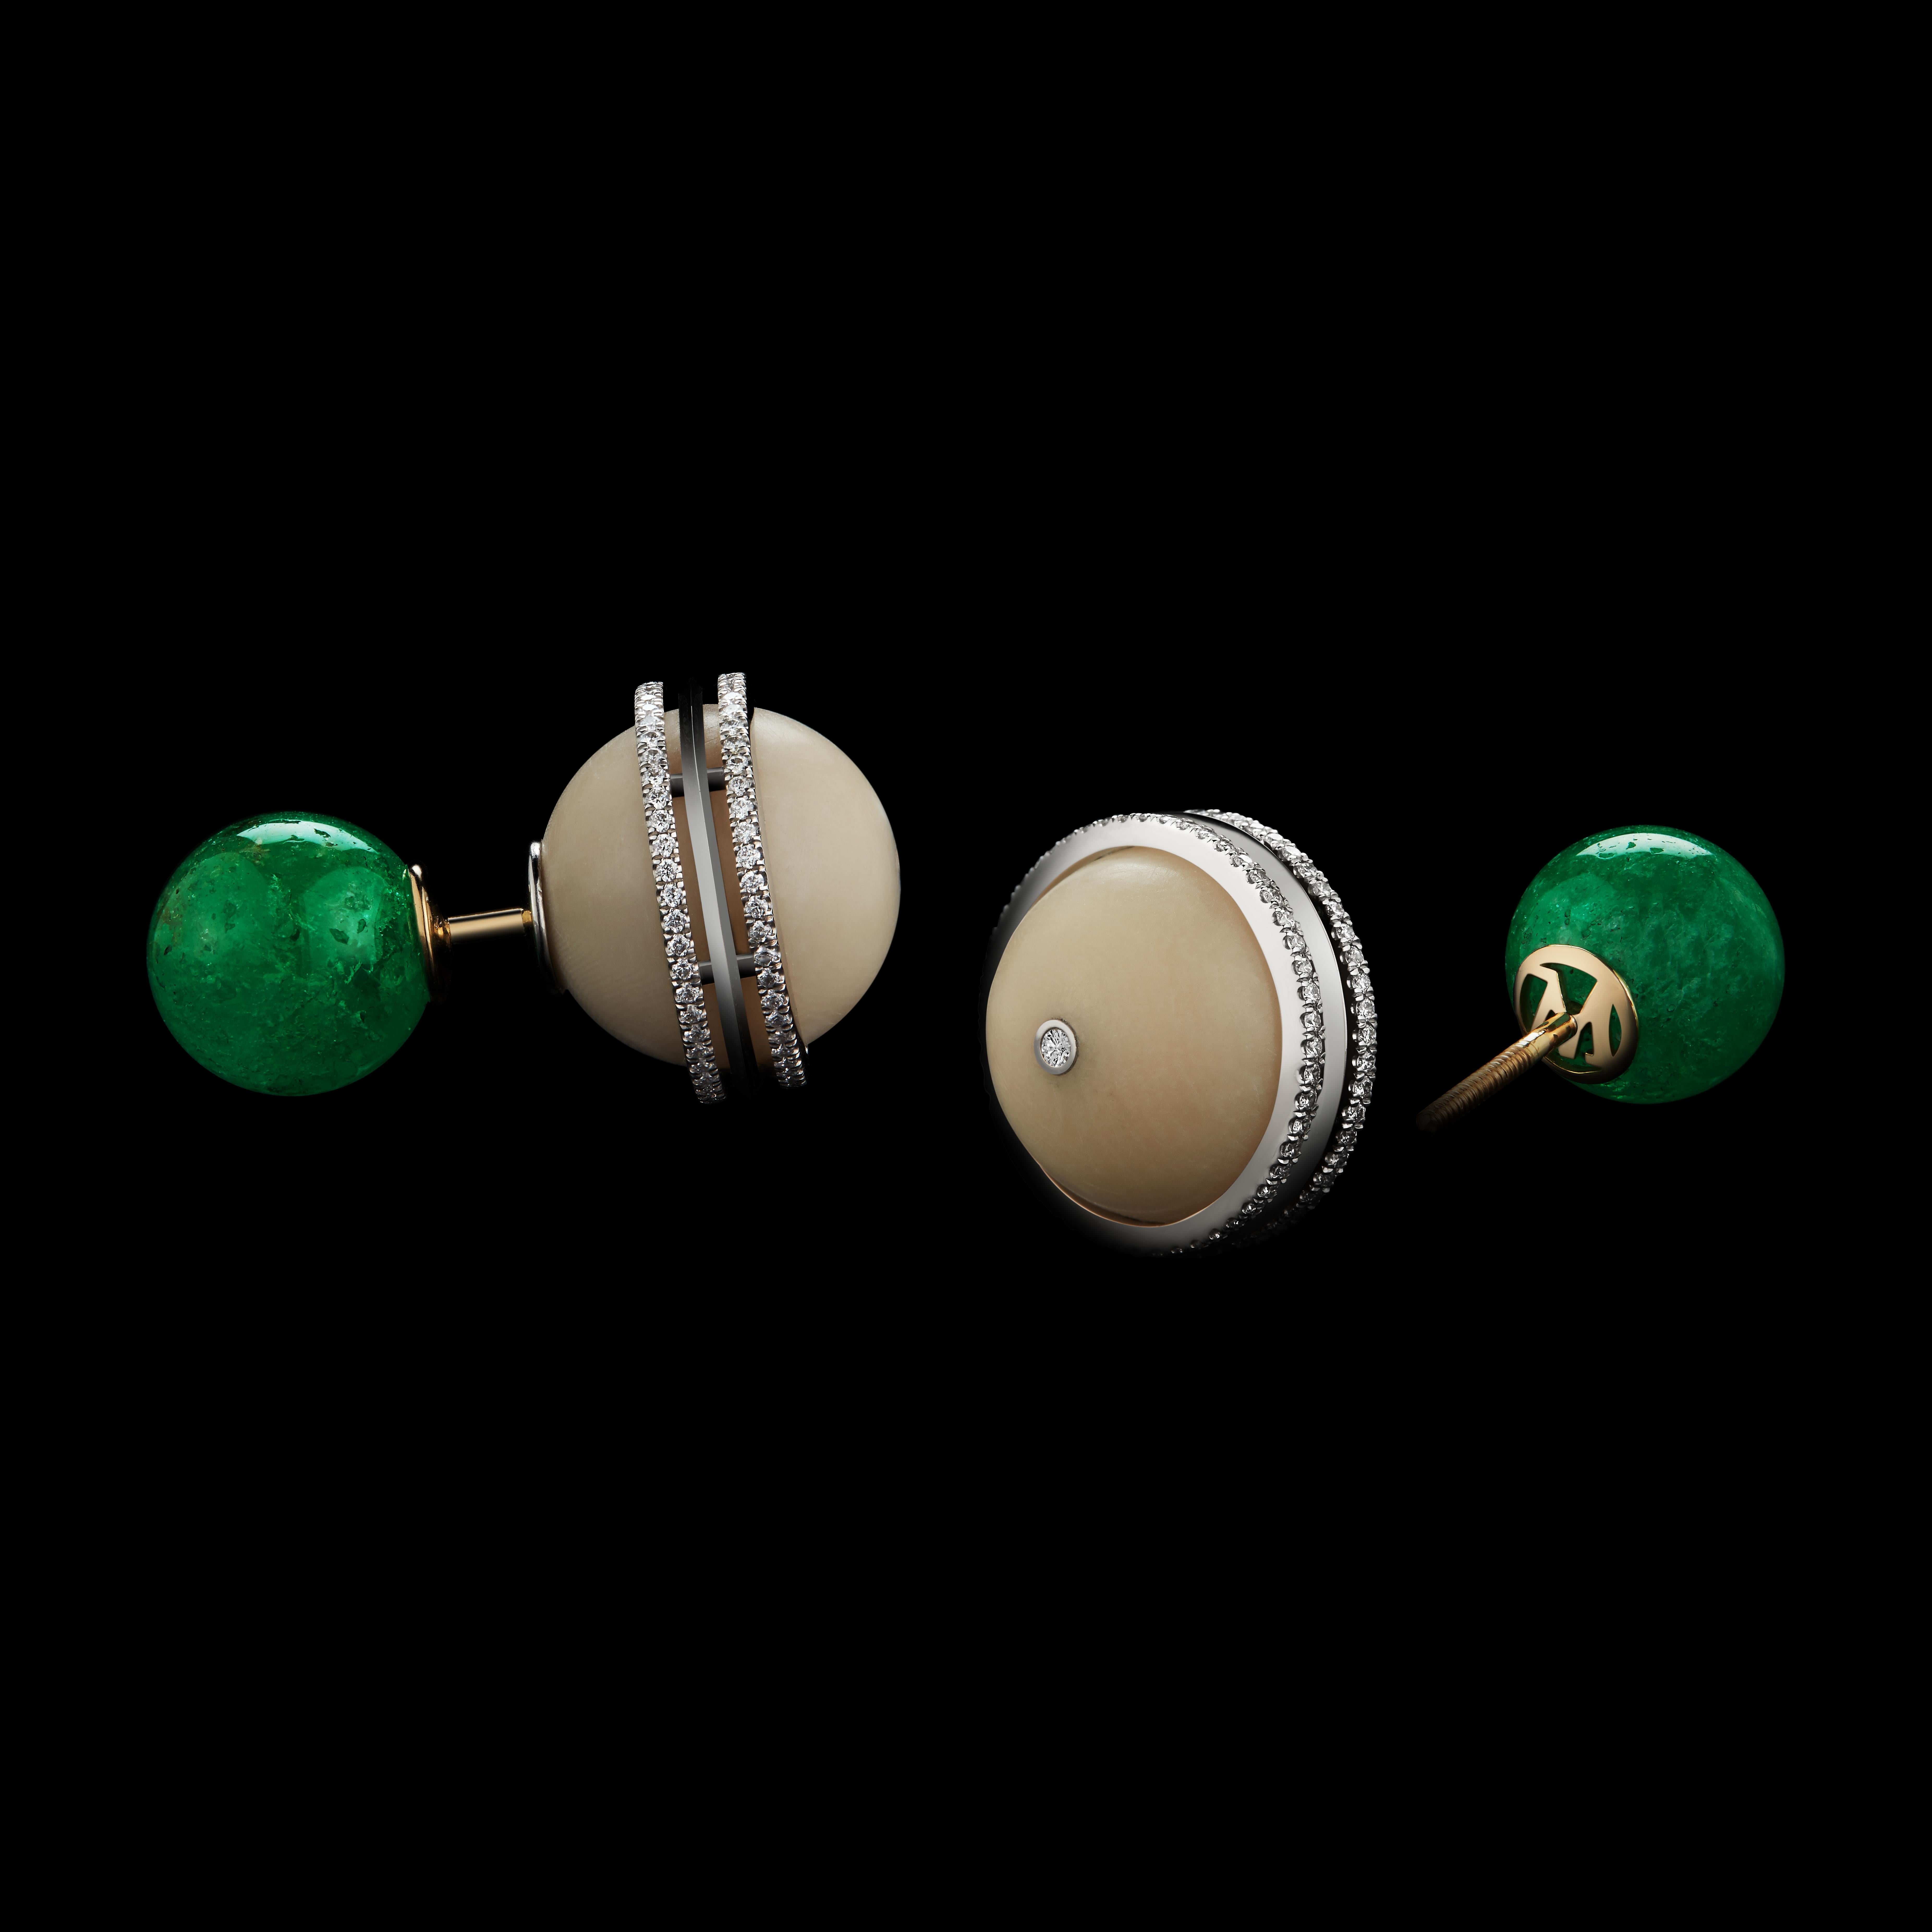 An Alexandra Mor One-Of-a-Kind double-sided stud earring featuring 21.96 carats of ethically-mined *Muzo-Mine Emerald Beads and 25.22 carats of Tagua Beads. Platinum set on 18 KY Gold Alexandra Mor logo gallery with Alexandra Mor's signature details